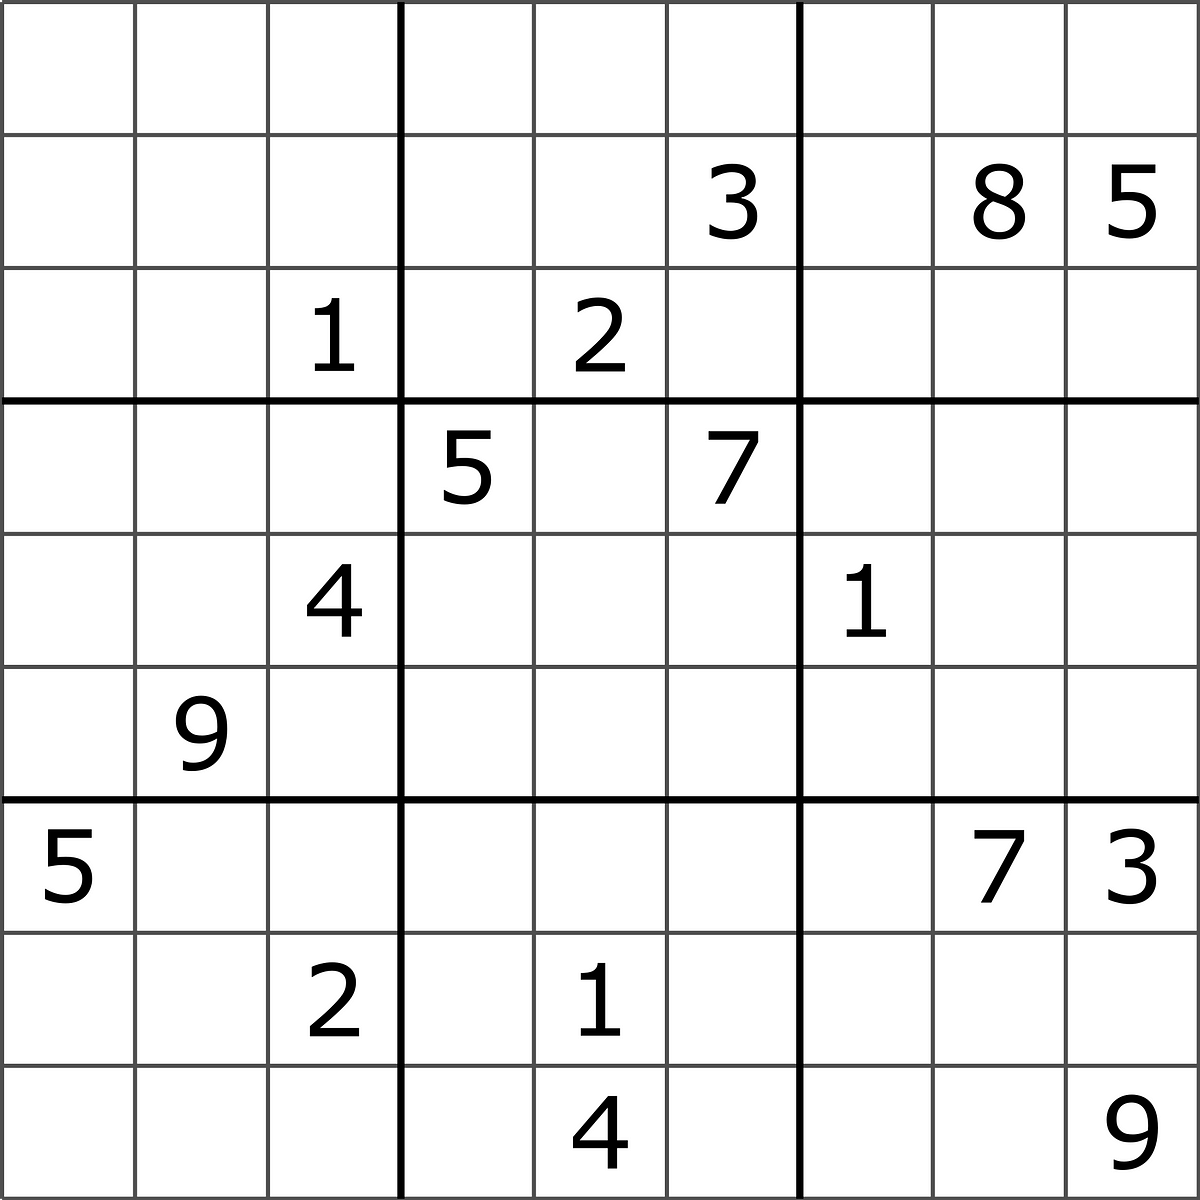 solving-sudoku-using-a-simple-search-algorithm-by-george-seif-medium